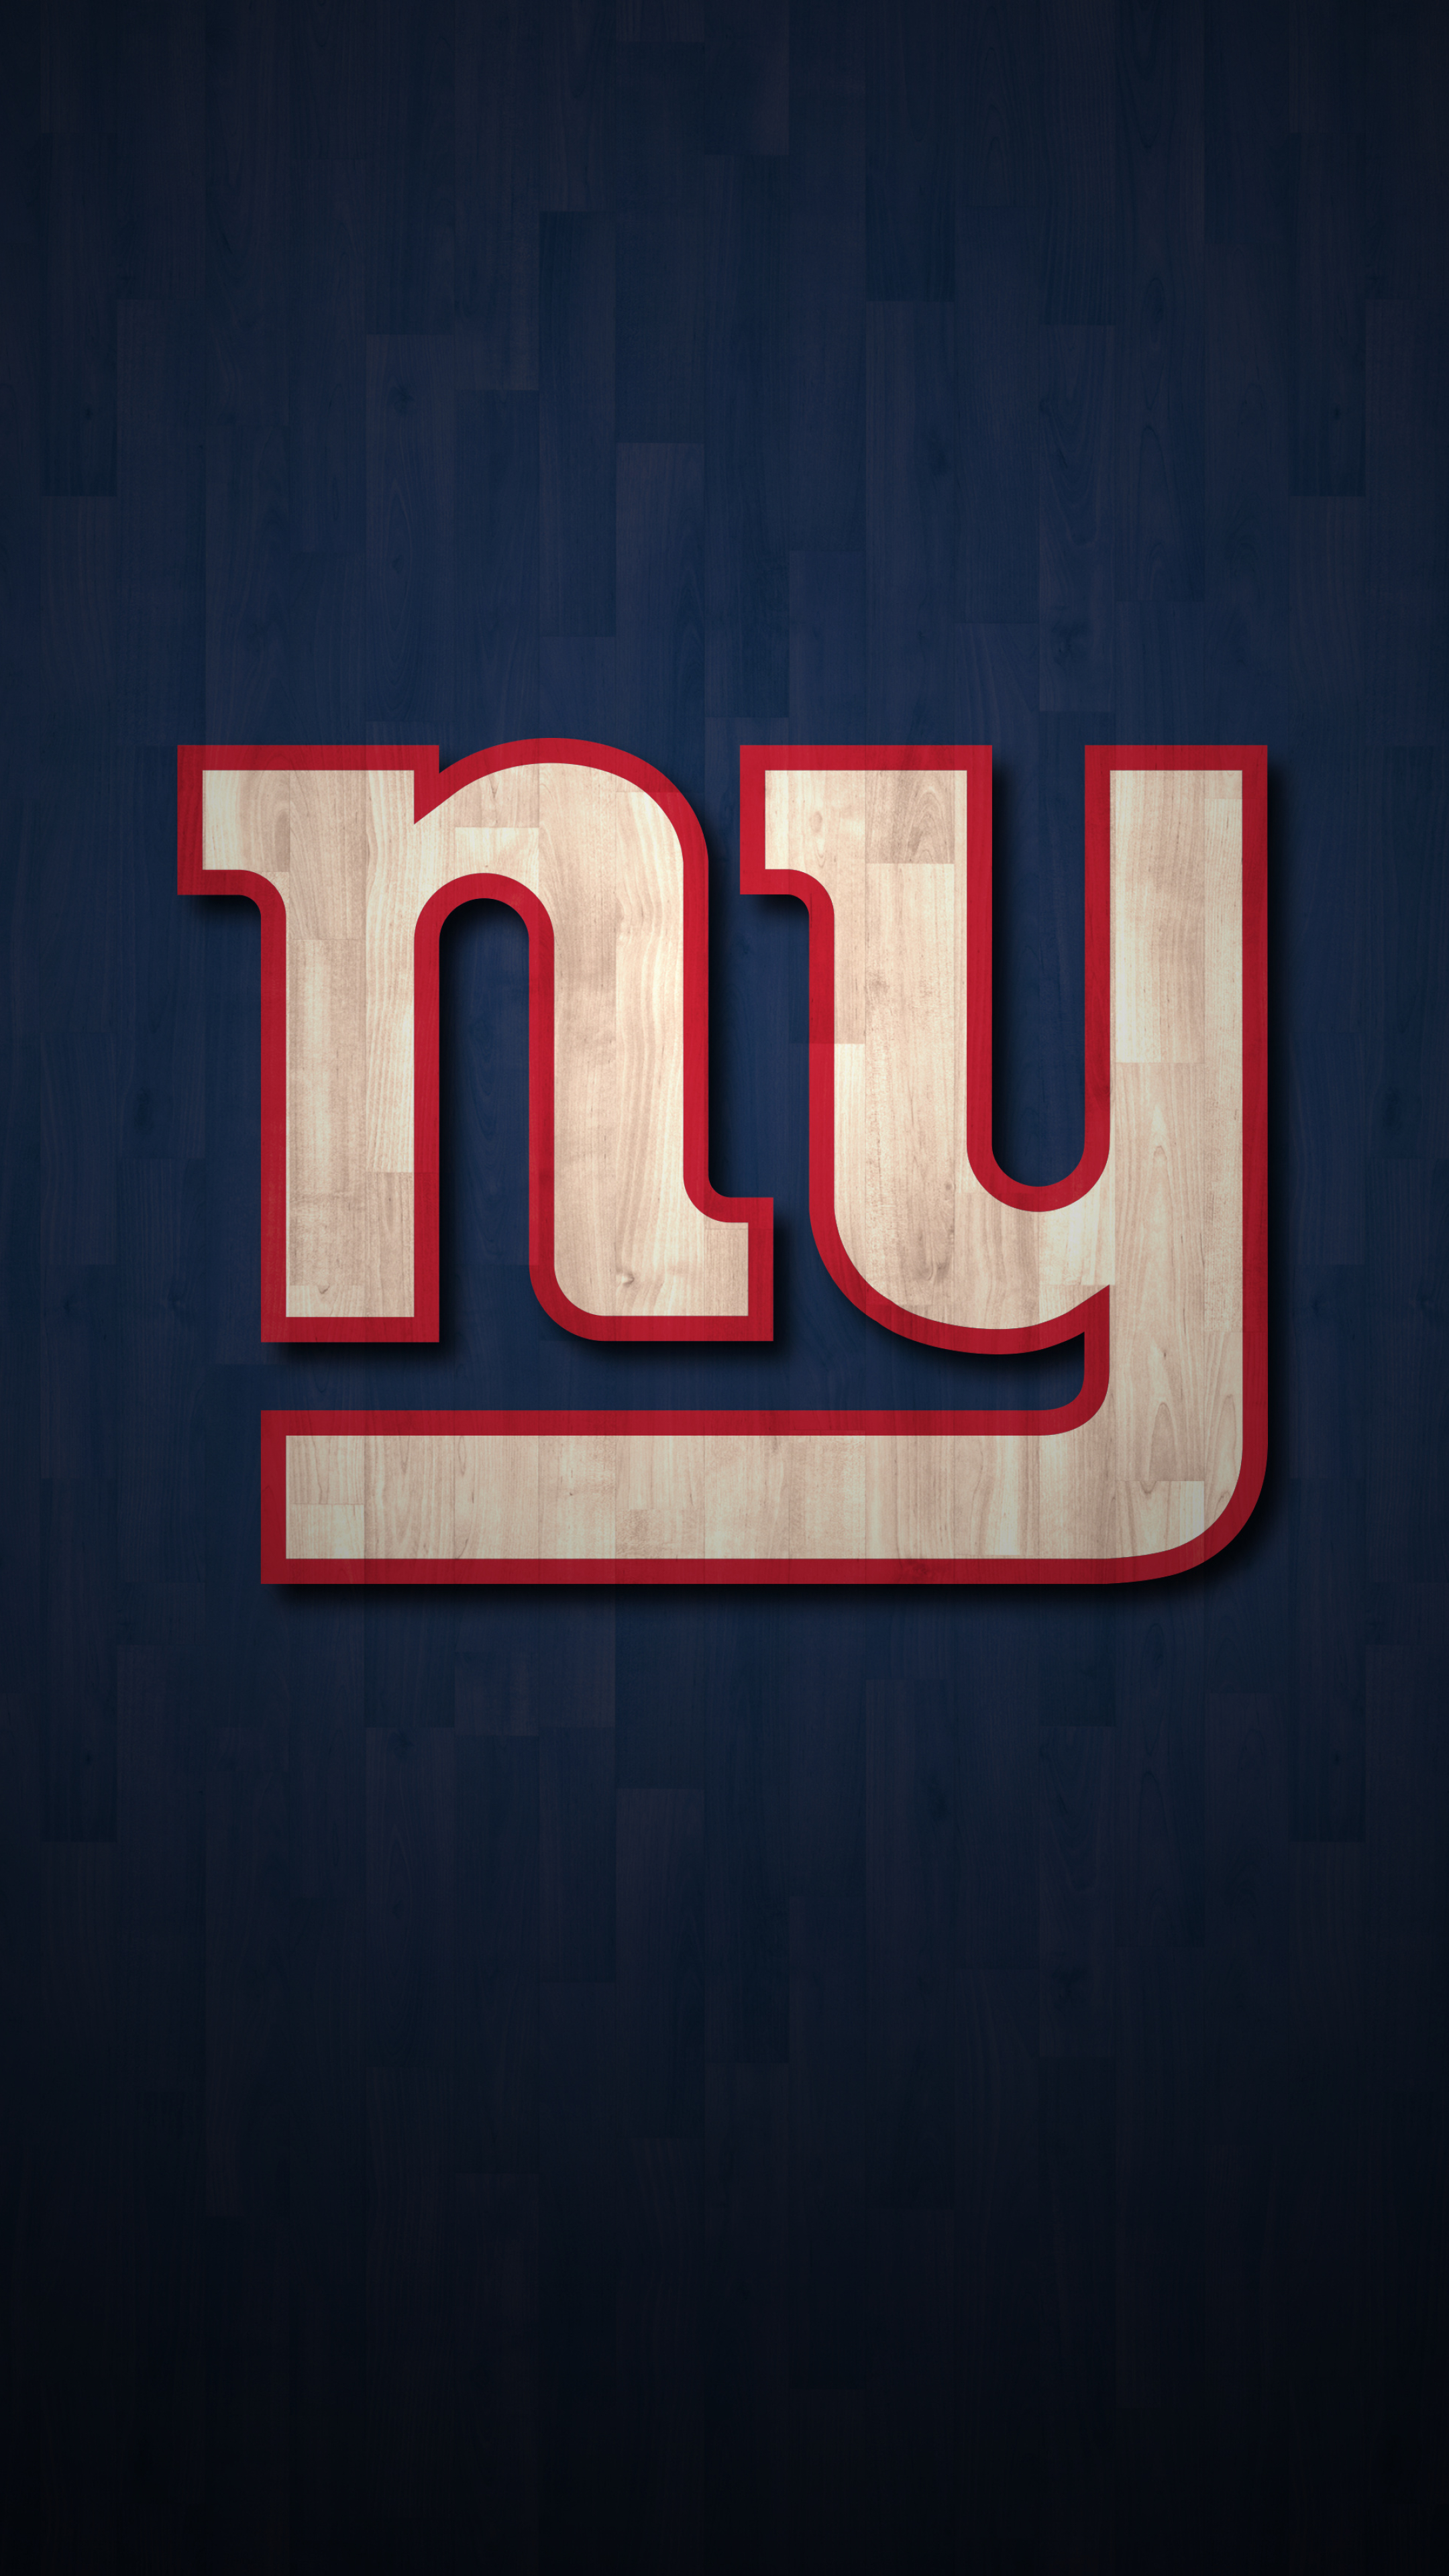 New York Giants: A member club of NFL's National Football Conference (NFC) East division. 2160x3840 4K Wallpaper.